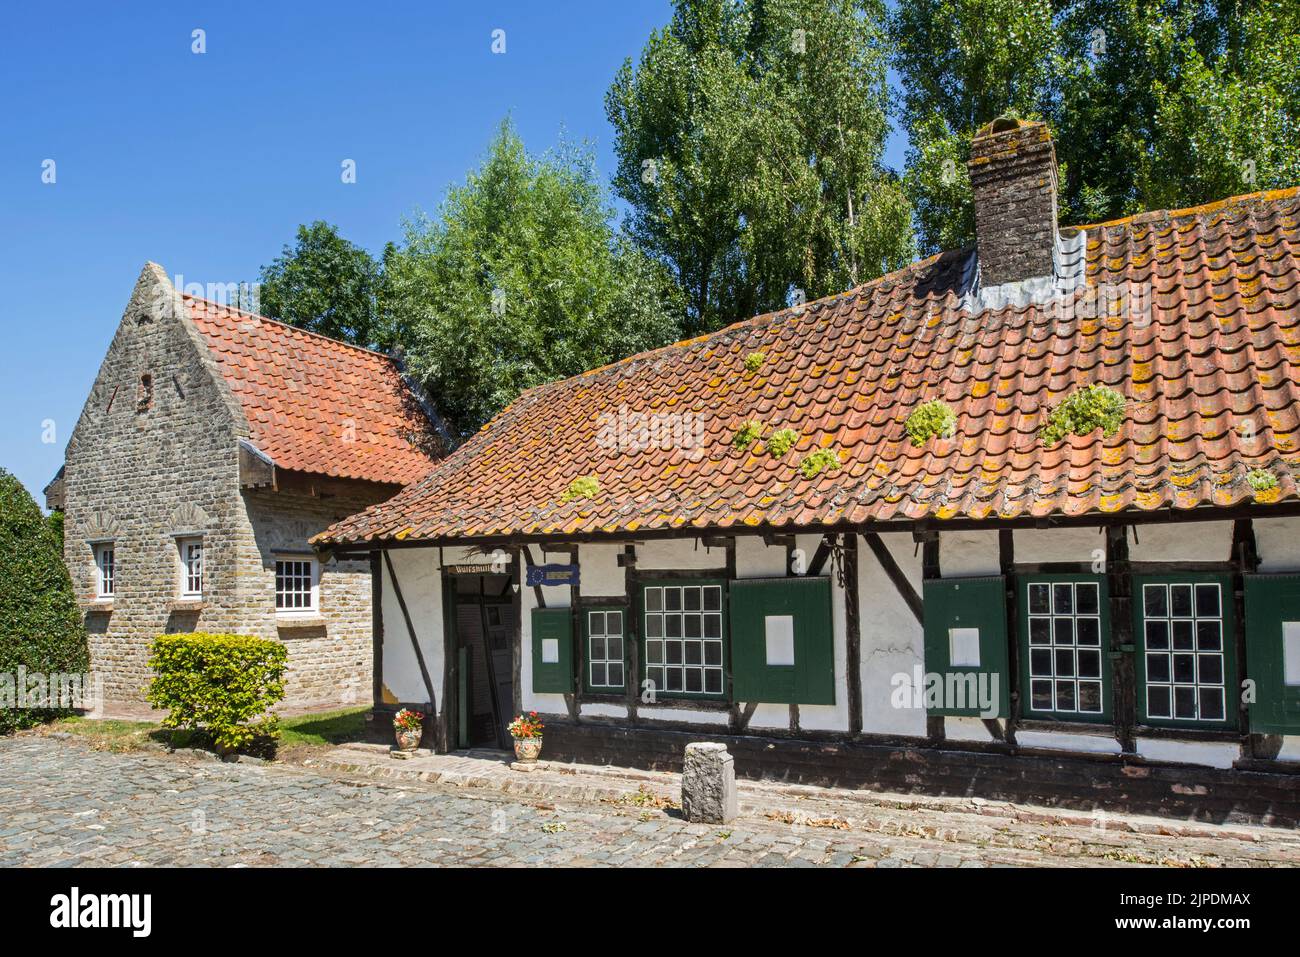 Rural half-timbered / timber frame house at the open air museum Bachten de Kupe, Izenberge, West Flanders, Belgium Stock Photo